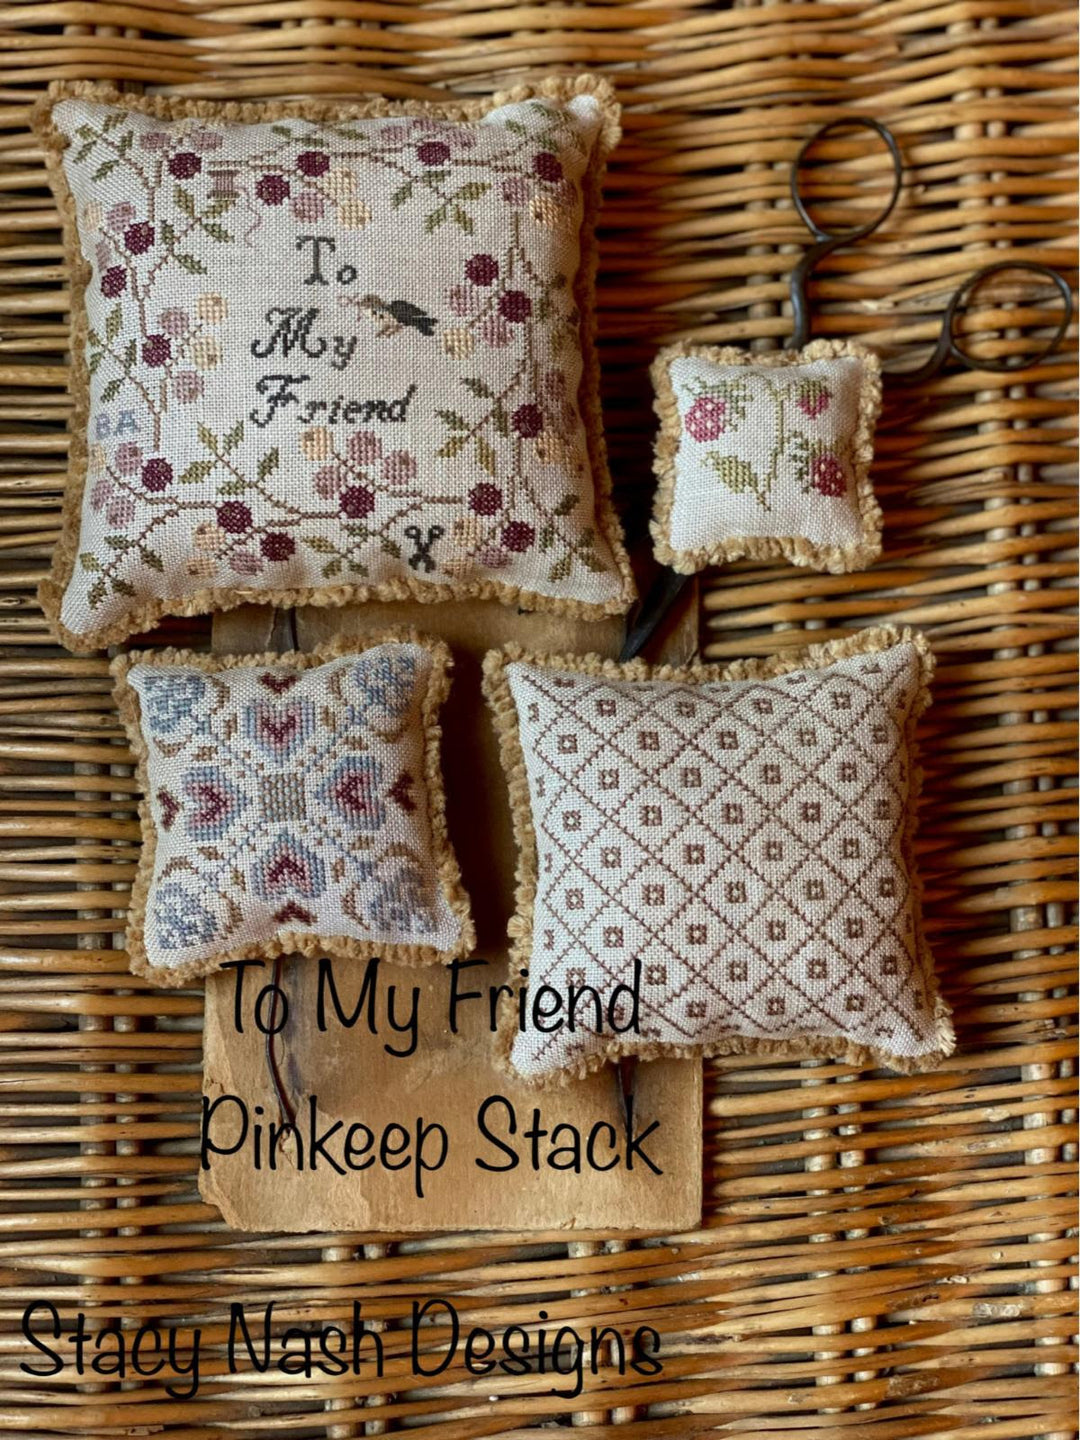 To My Friend Pinkeep Stack | Stacy Nash Designs